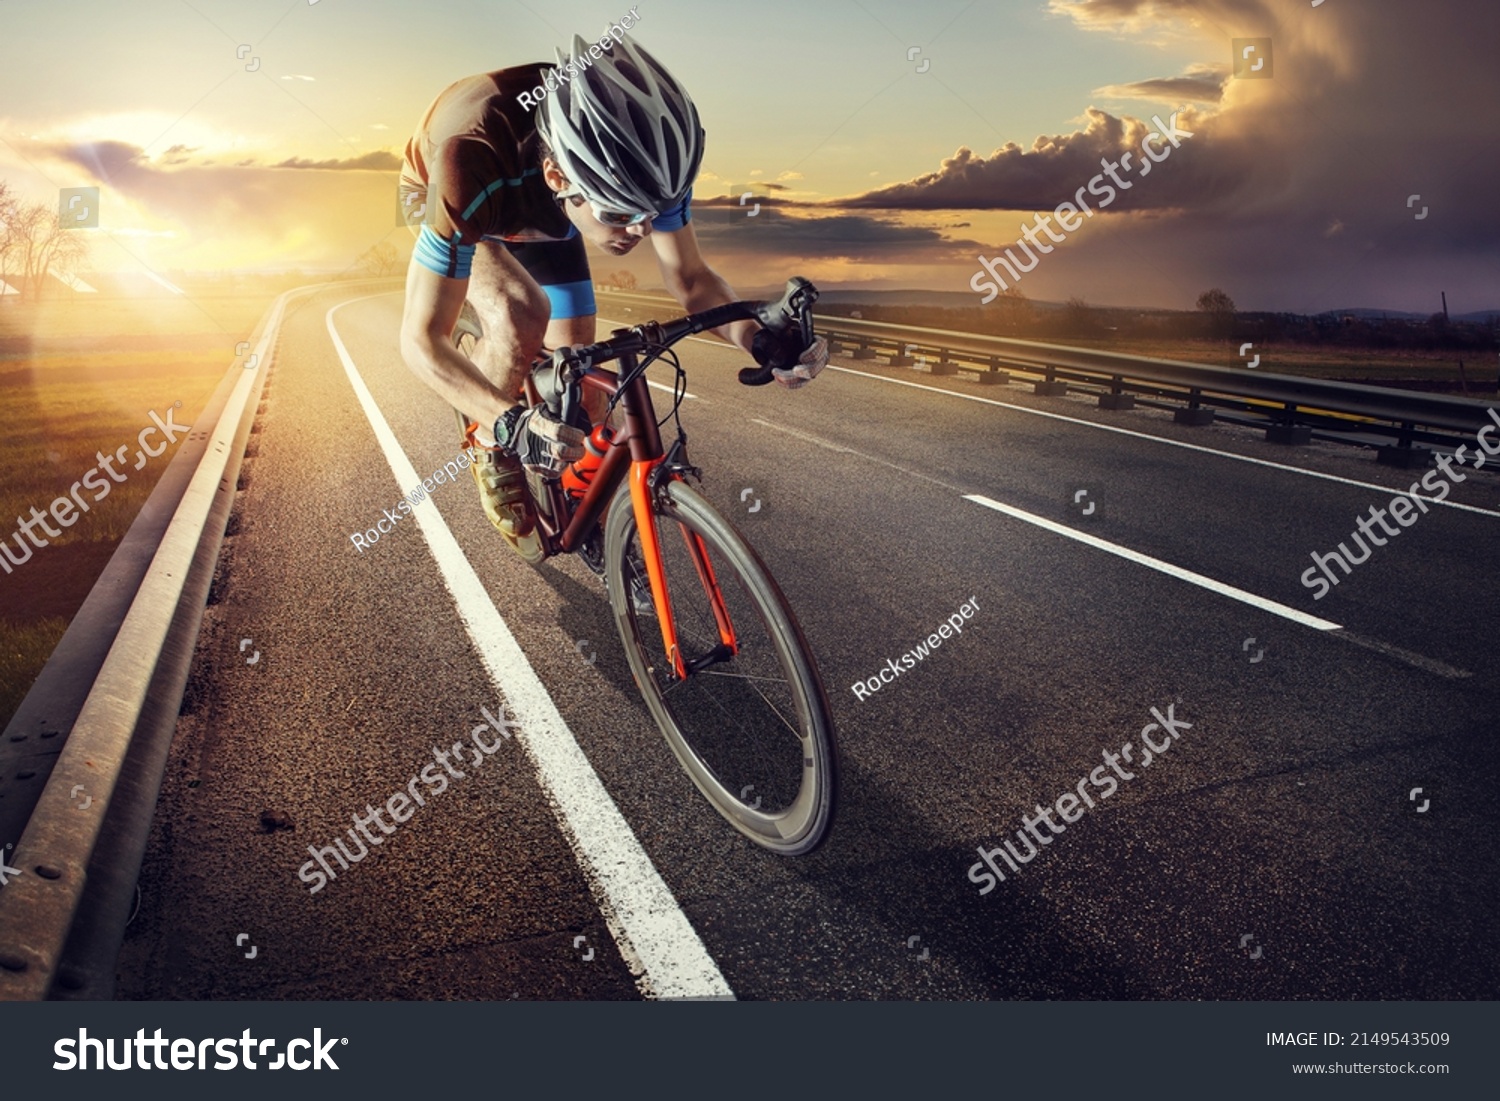 The cyclist rides on his bike at sunset. Dramatic background. #2149543509